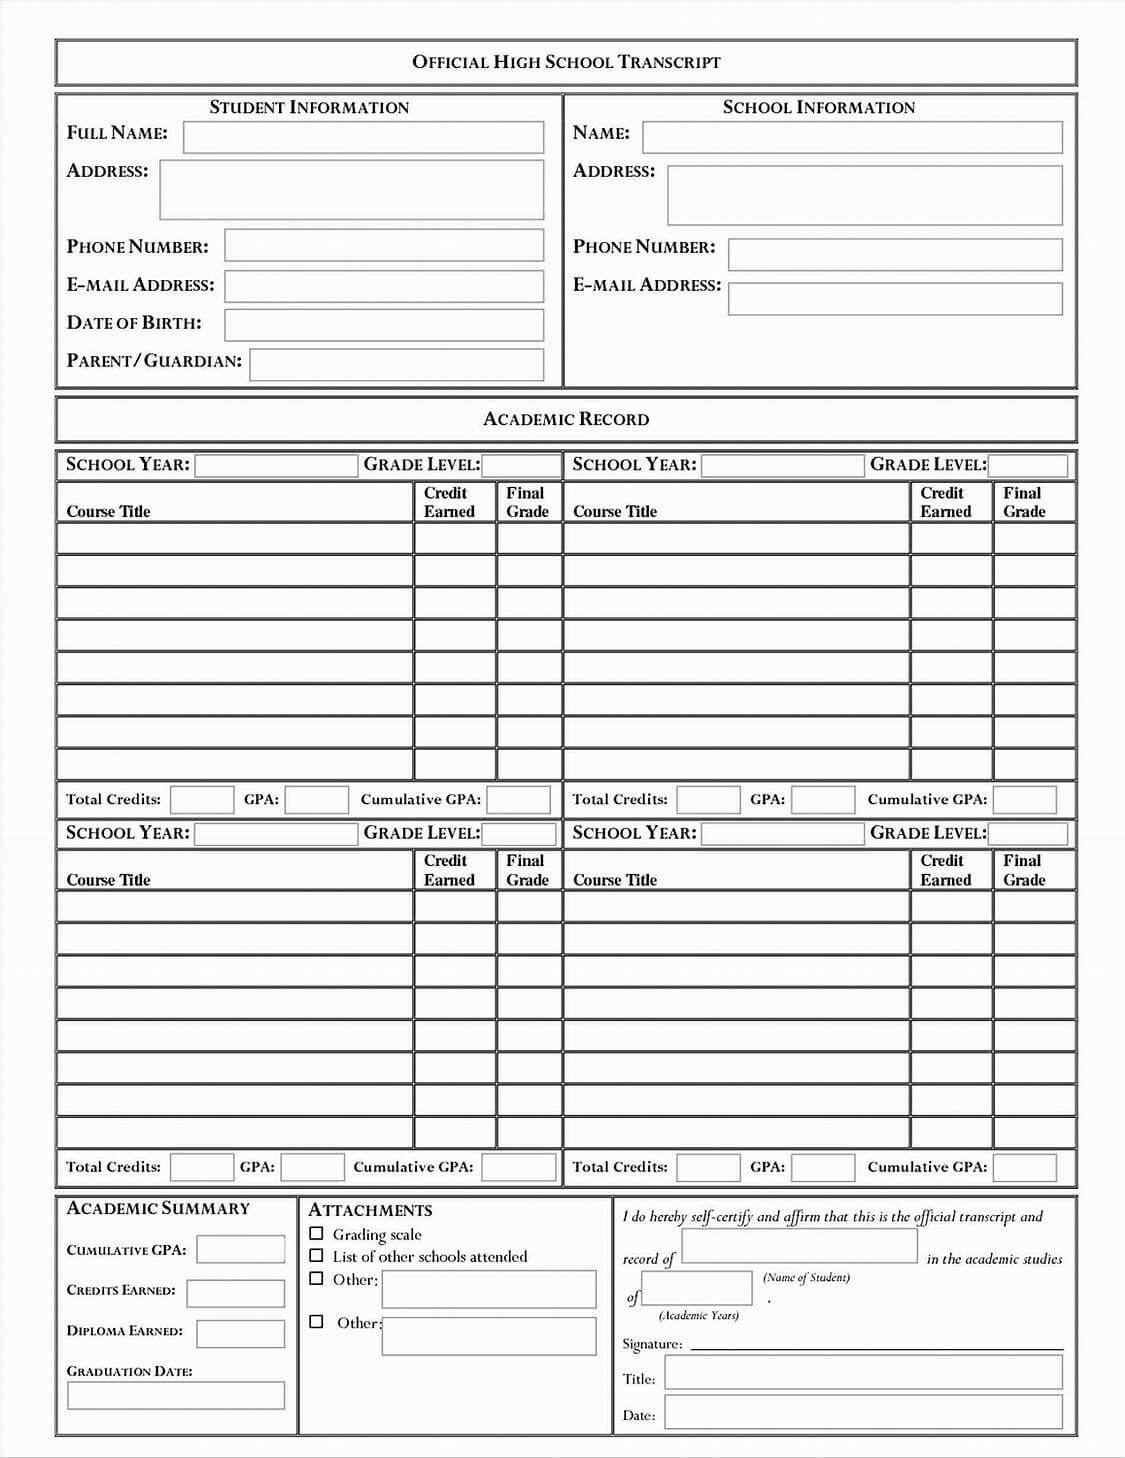 Image Result For Middle School Transcript Template | Free Inside Homeschool Middle School Report Card Template